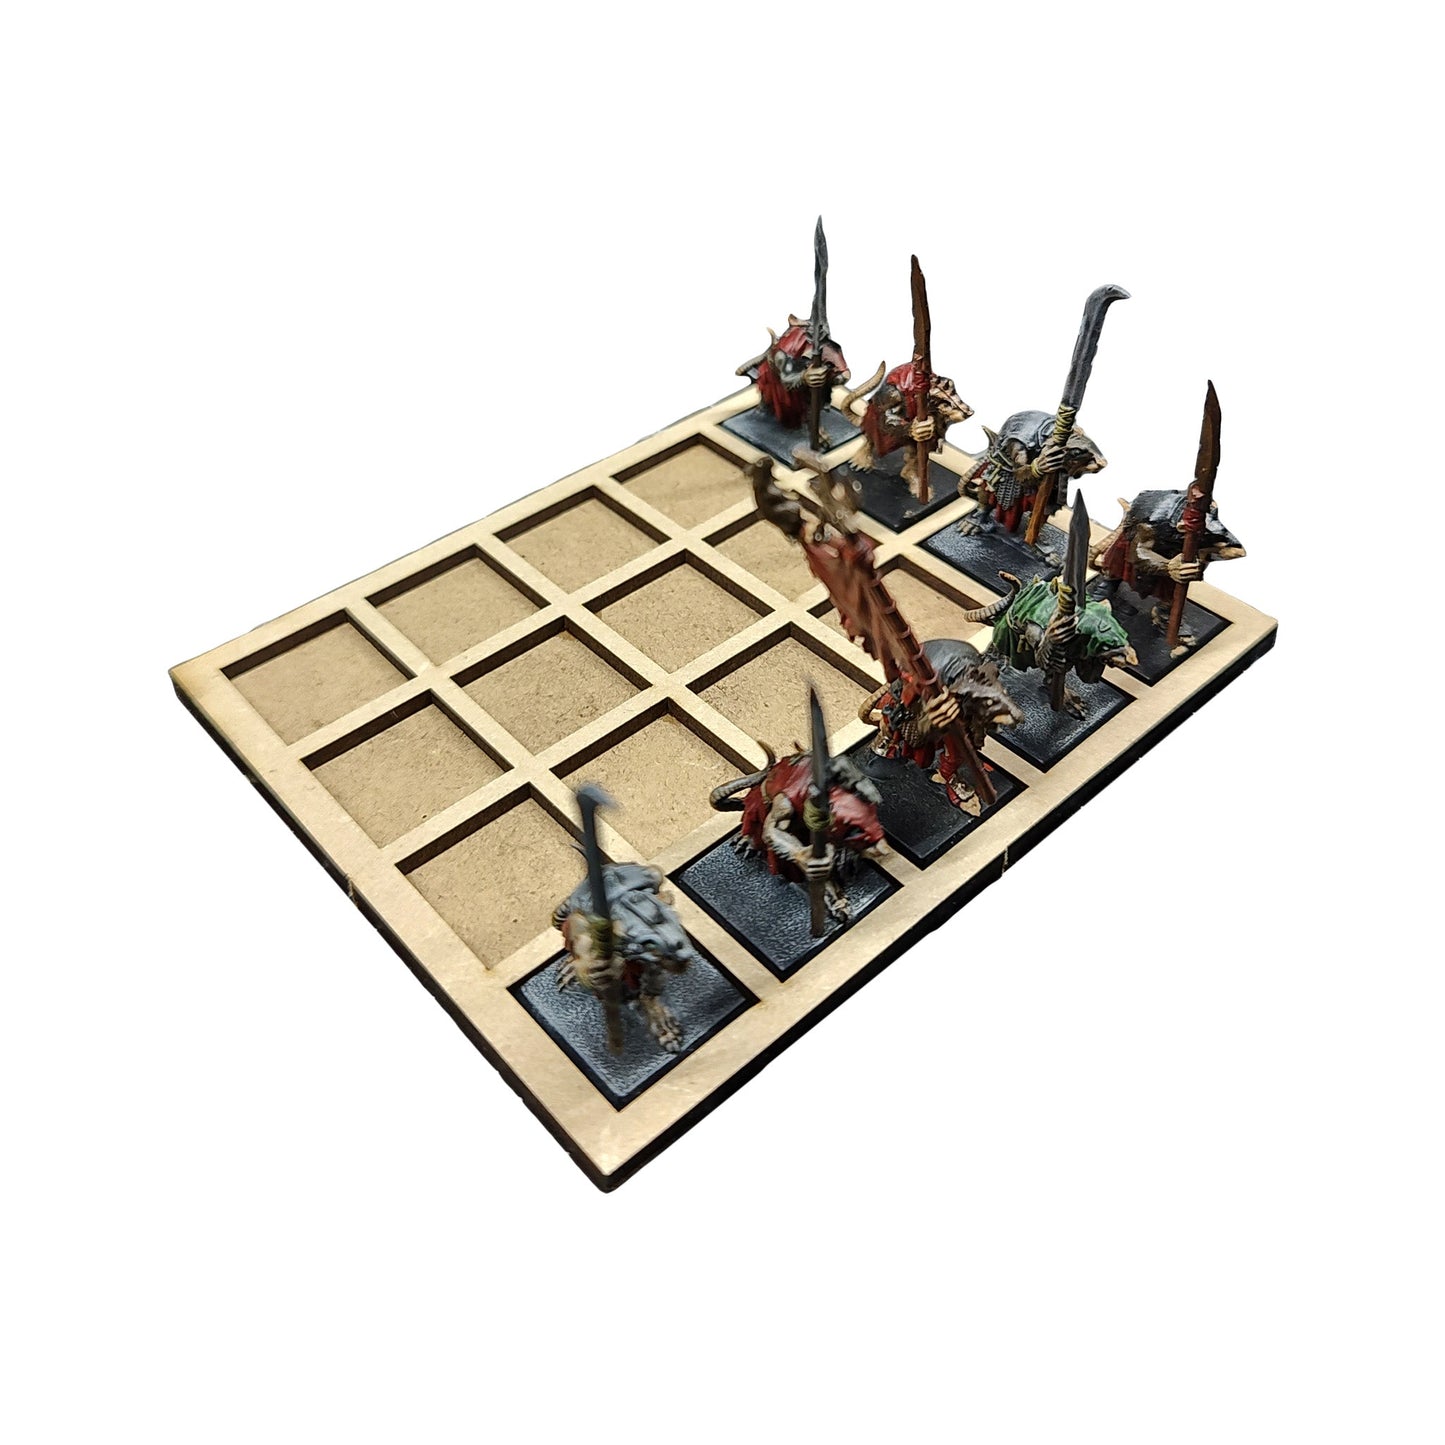 20 to 25mm conversion Square Base Movement Trays - Battlefield Accessories